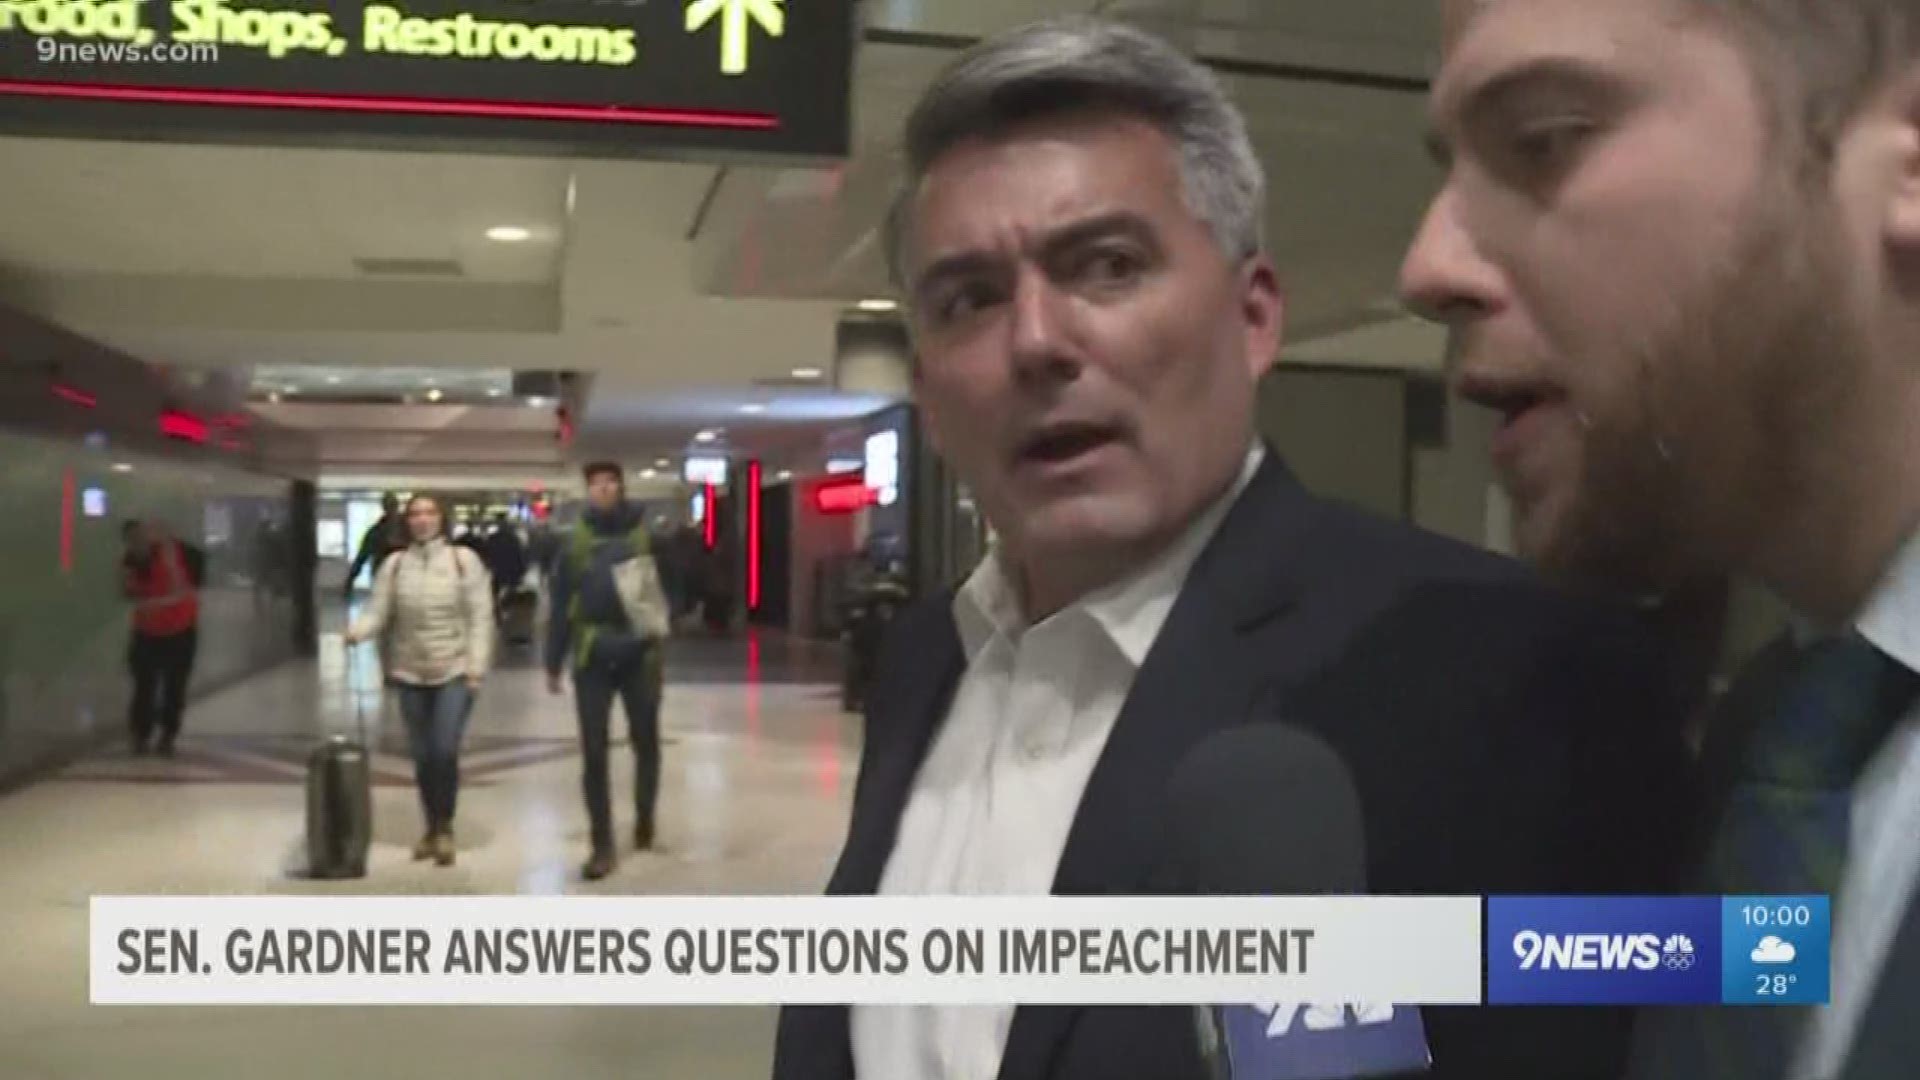 Gardner has avoided impeachment questions for months. So tonight, we caught up with him at the airport after he flew back from Washington.